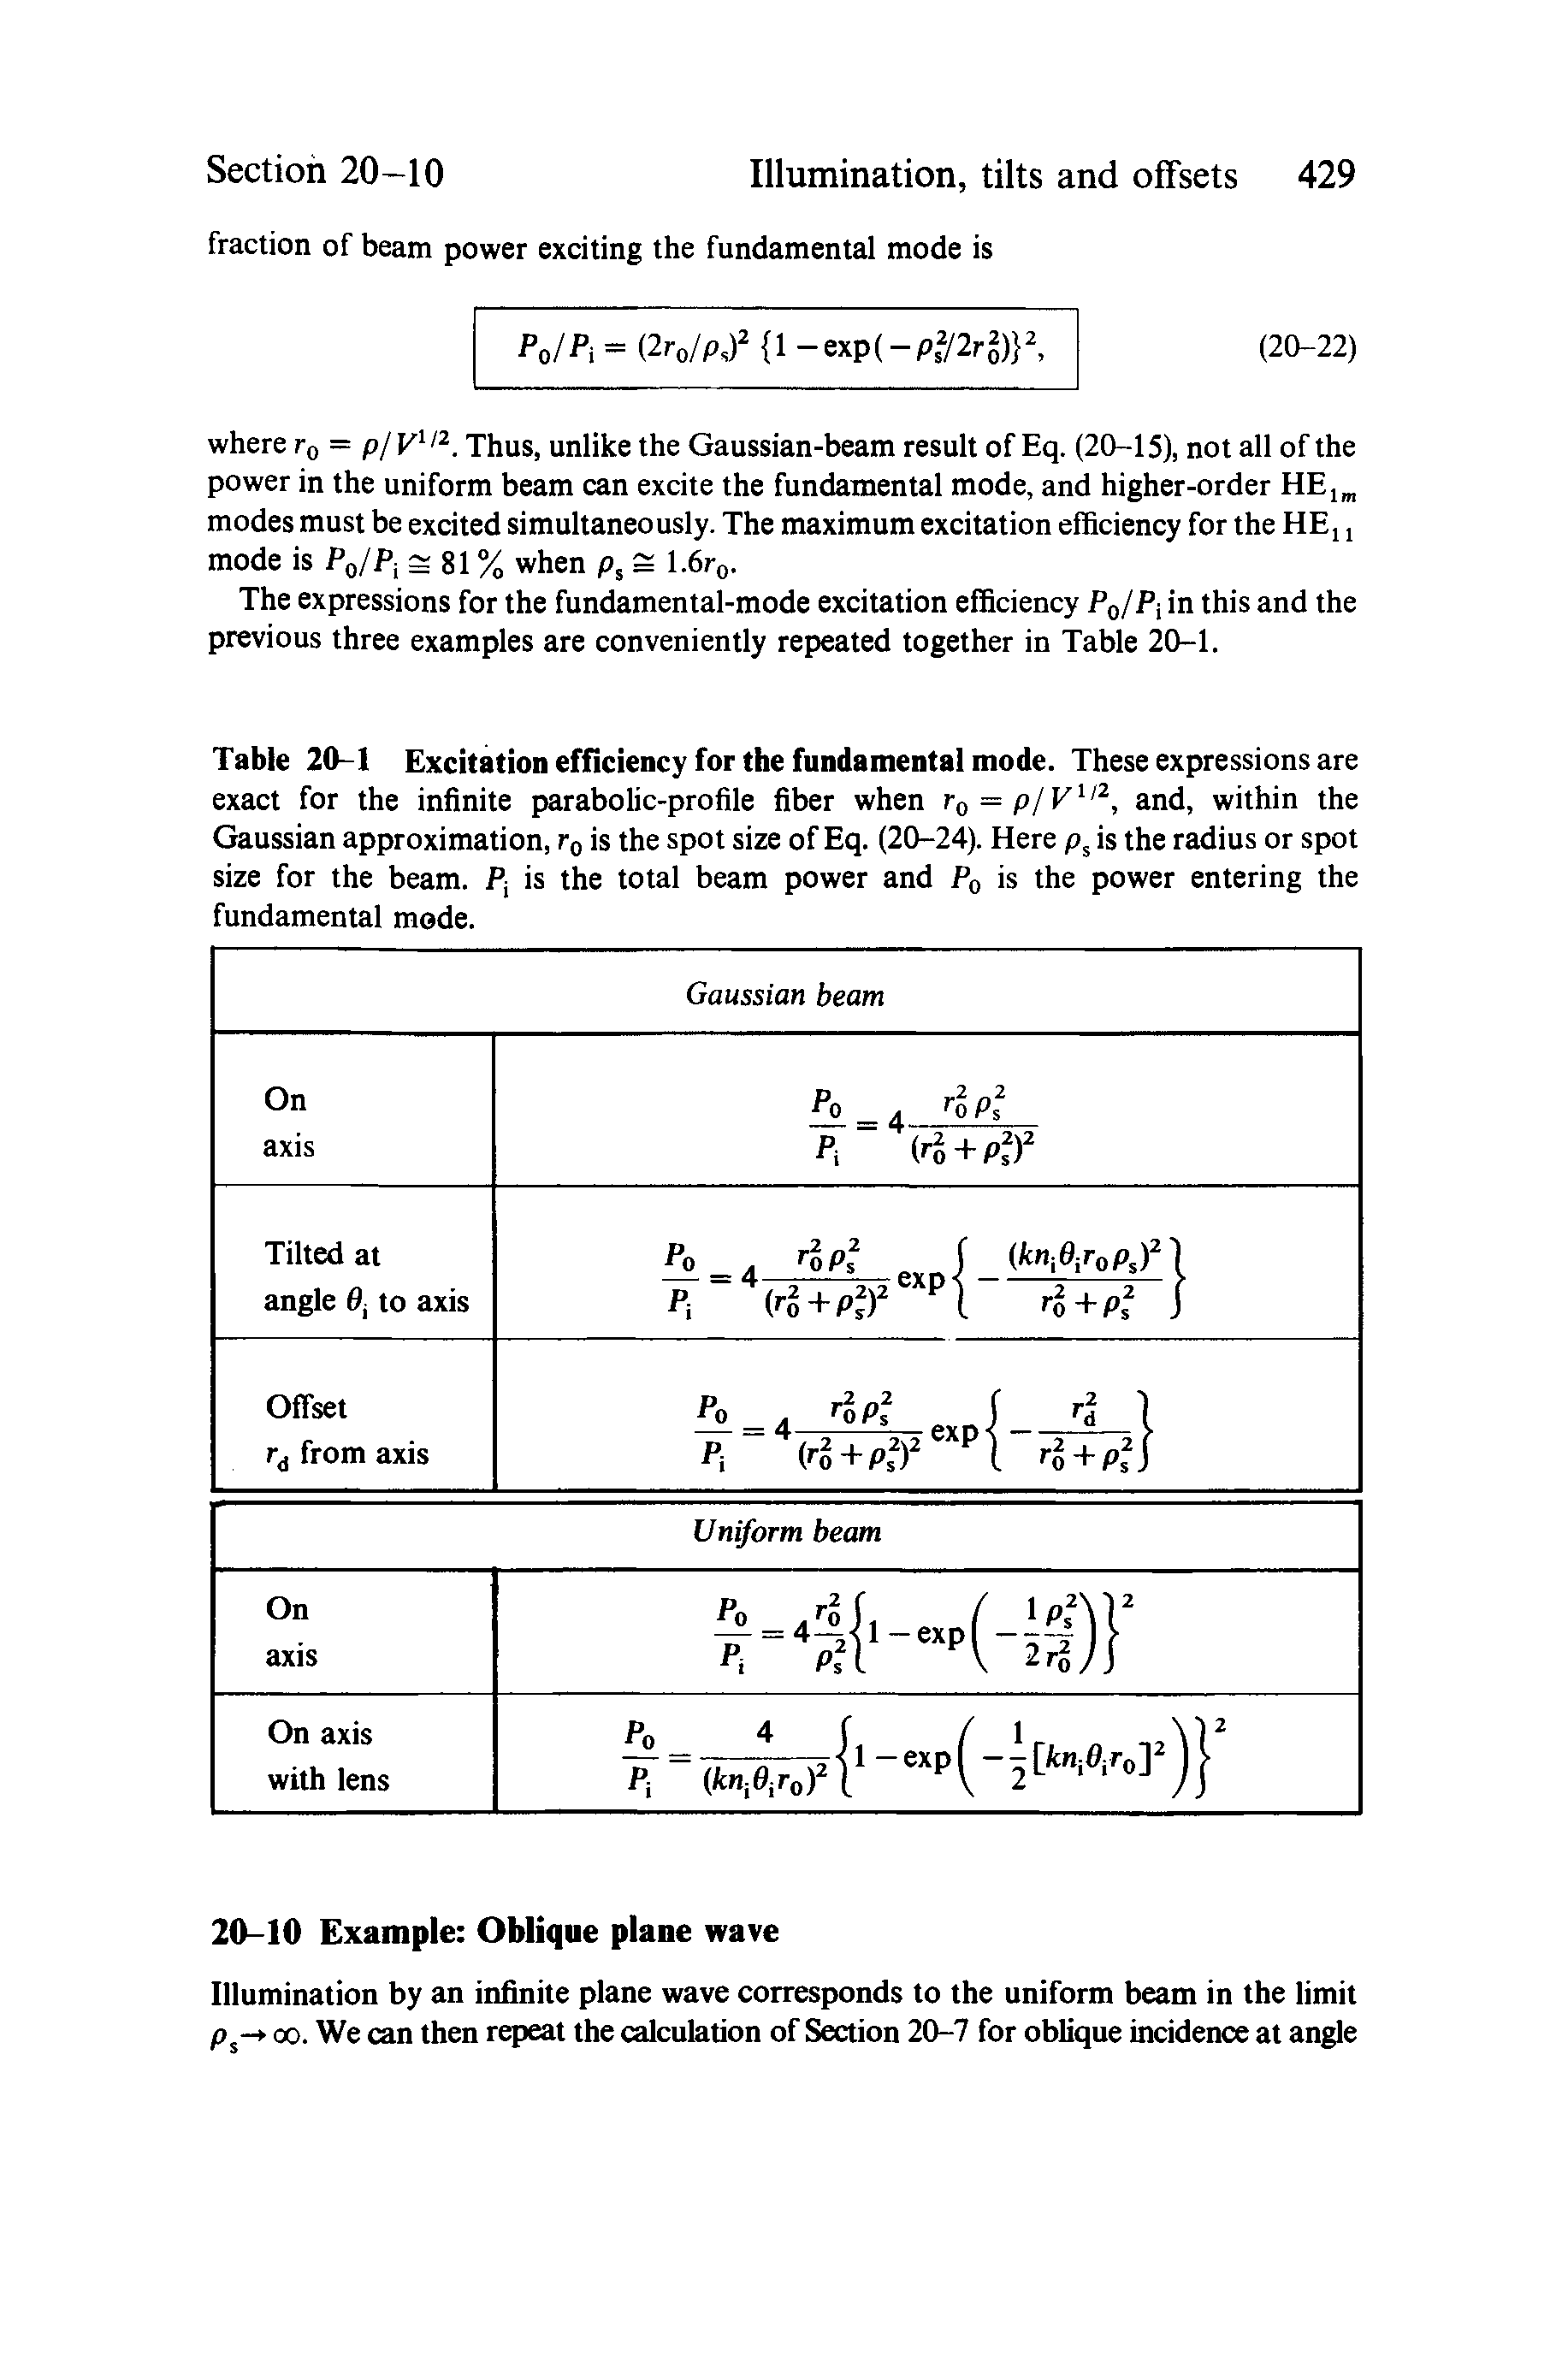 Table 20-1 Excitation efficiency for the fundamental mode. These expressions are exact for the infinite parabolic-profile fiber when rQ = and, within the...